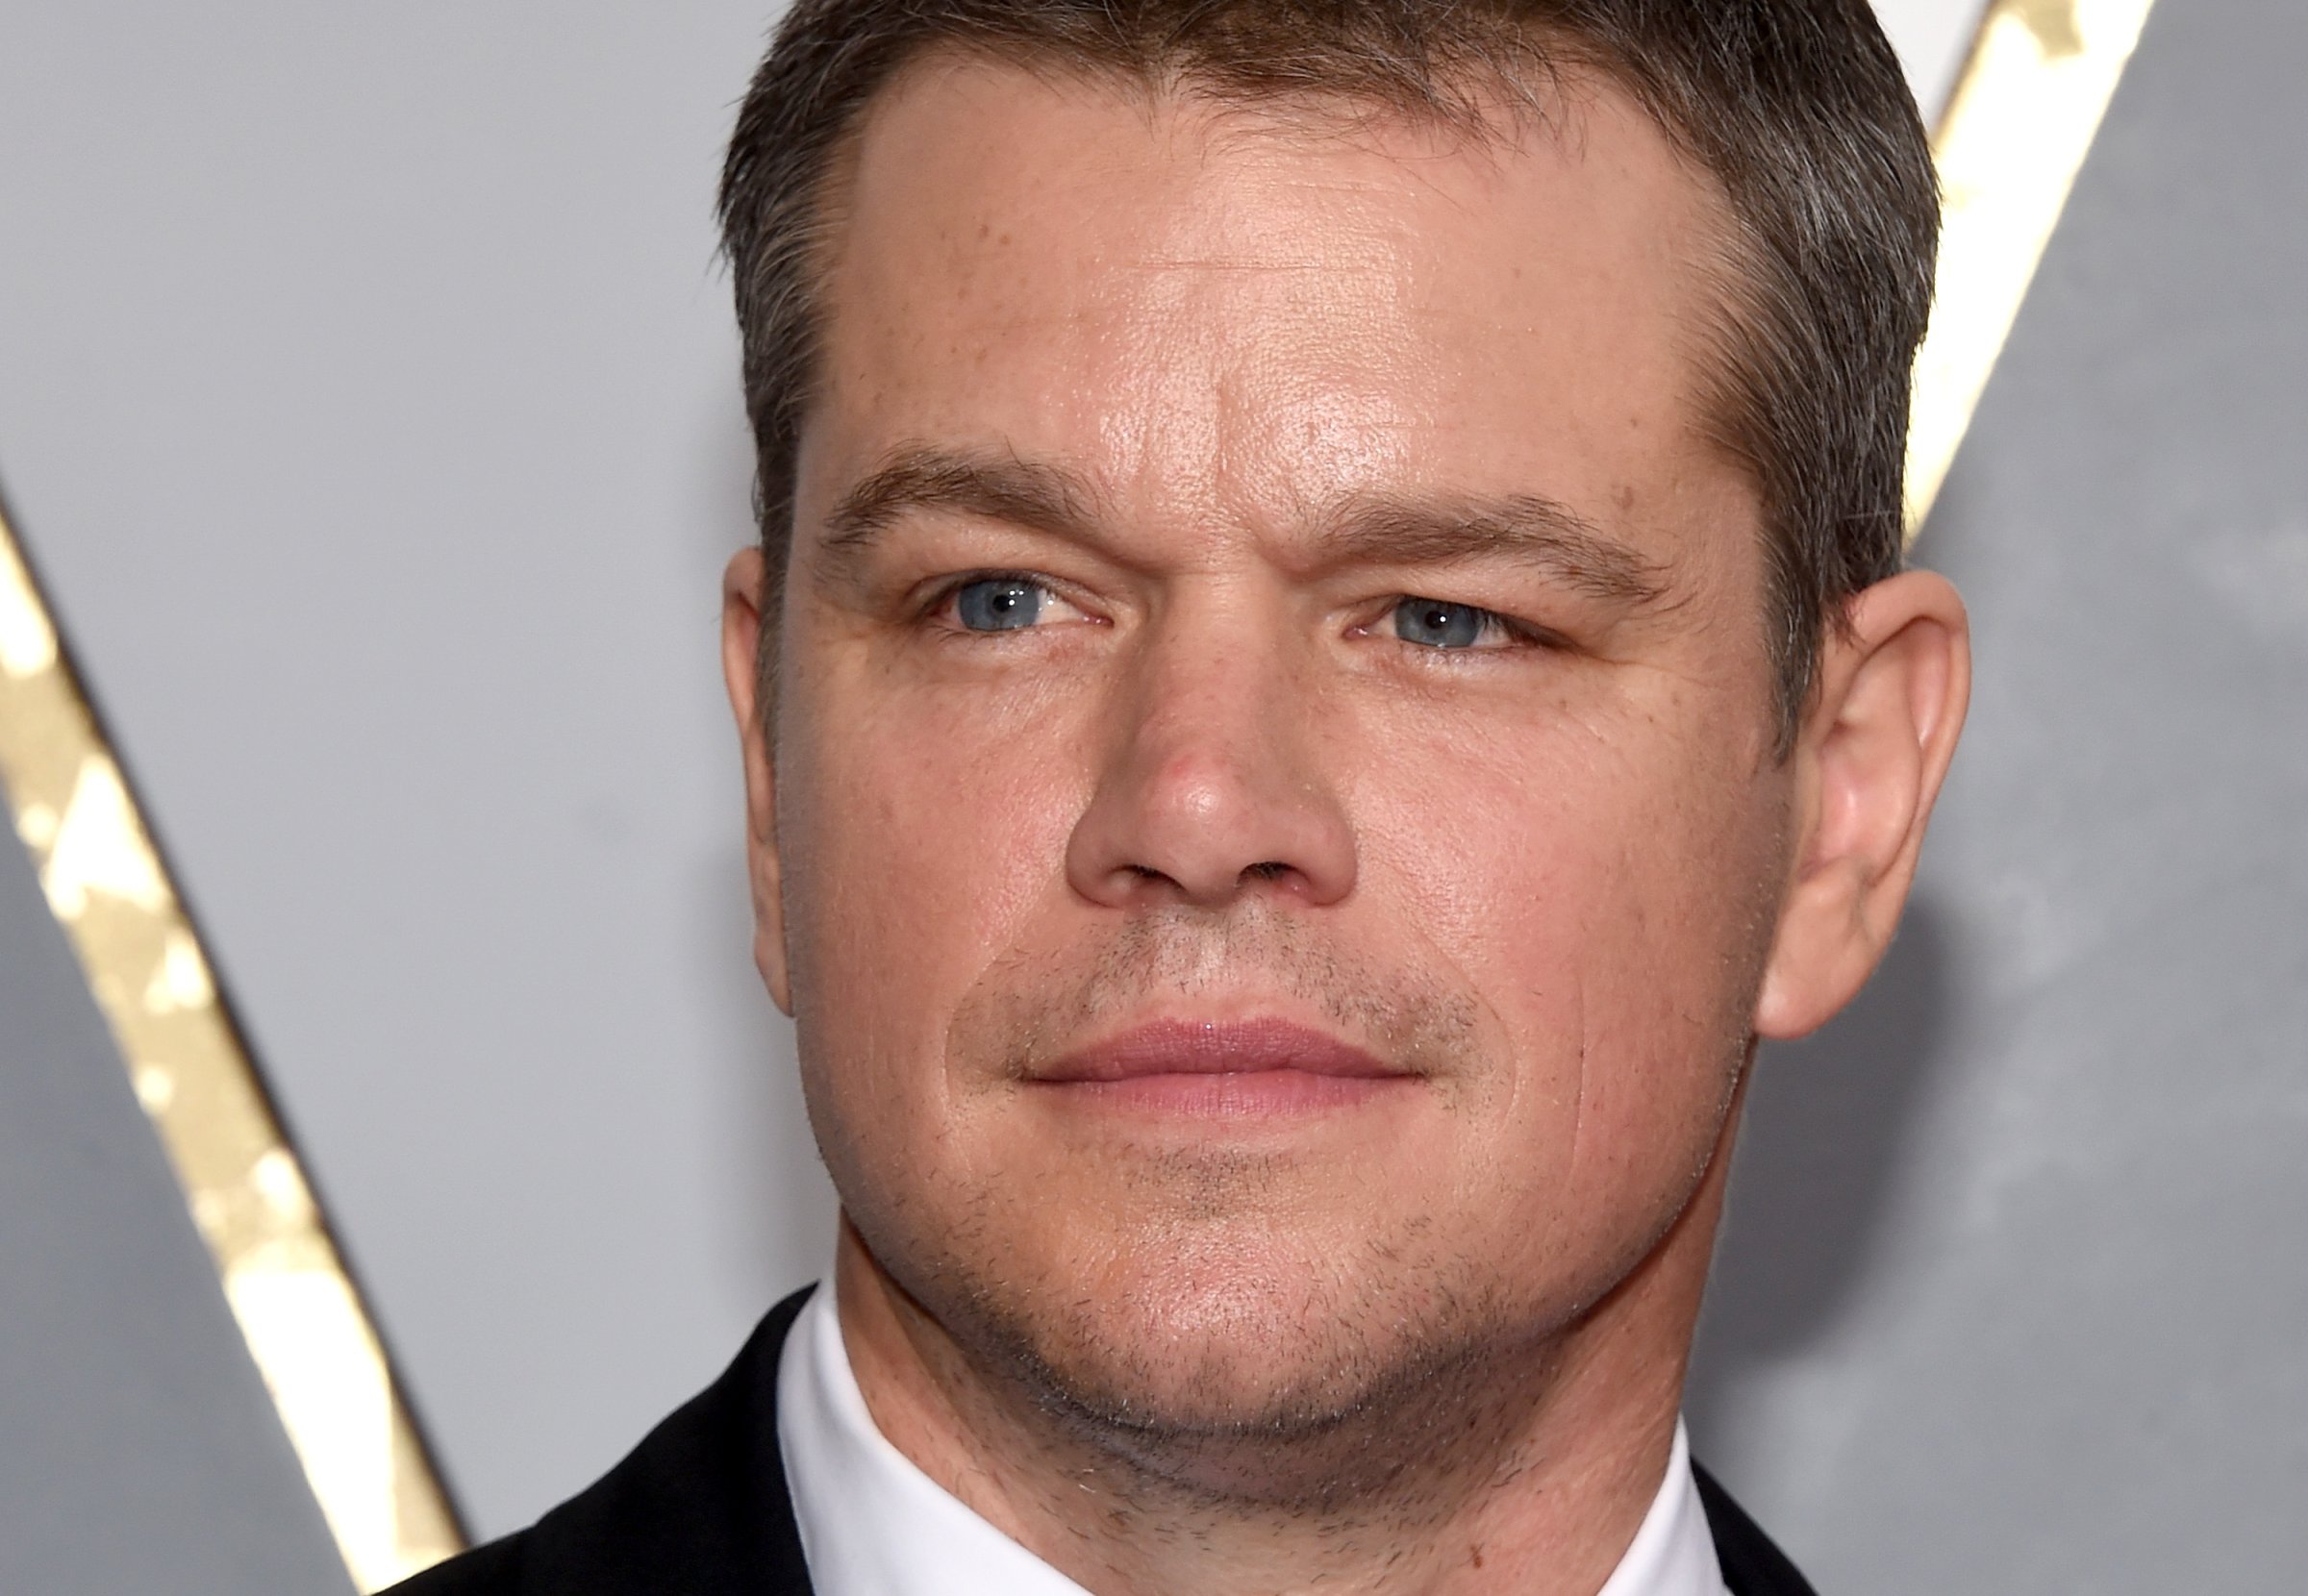 Matt Damon attends the 88th Annual Academy Awards at Hollywood & Highland Center on February 28, 2016 in Hollywood, California.